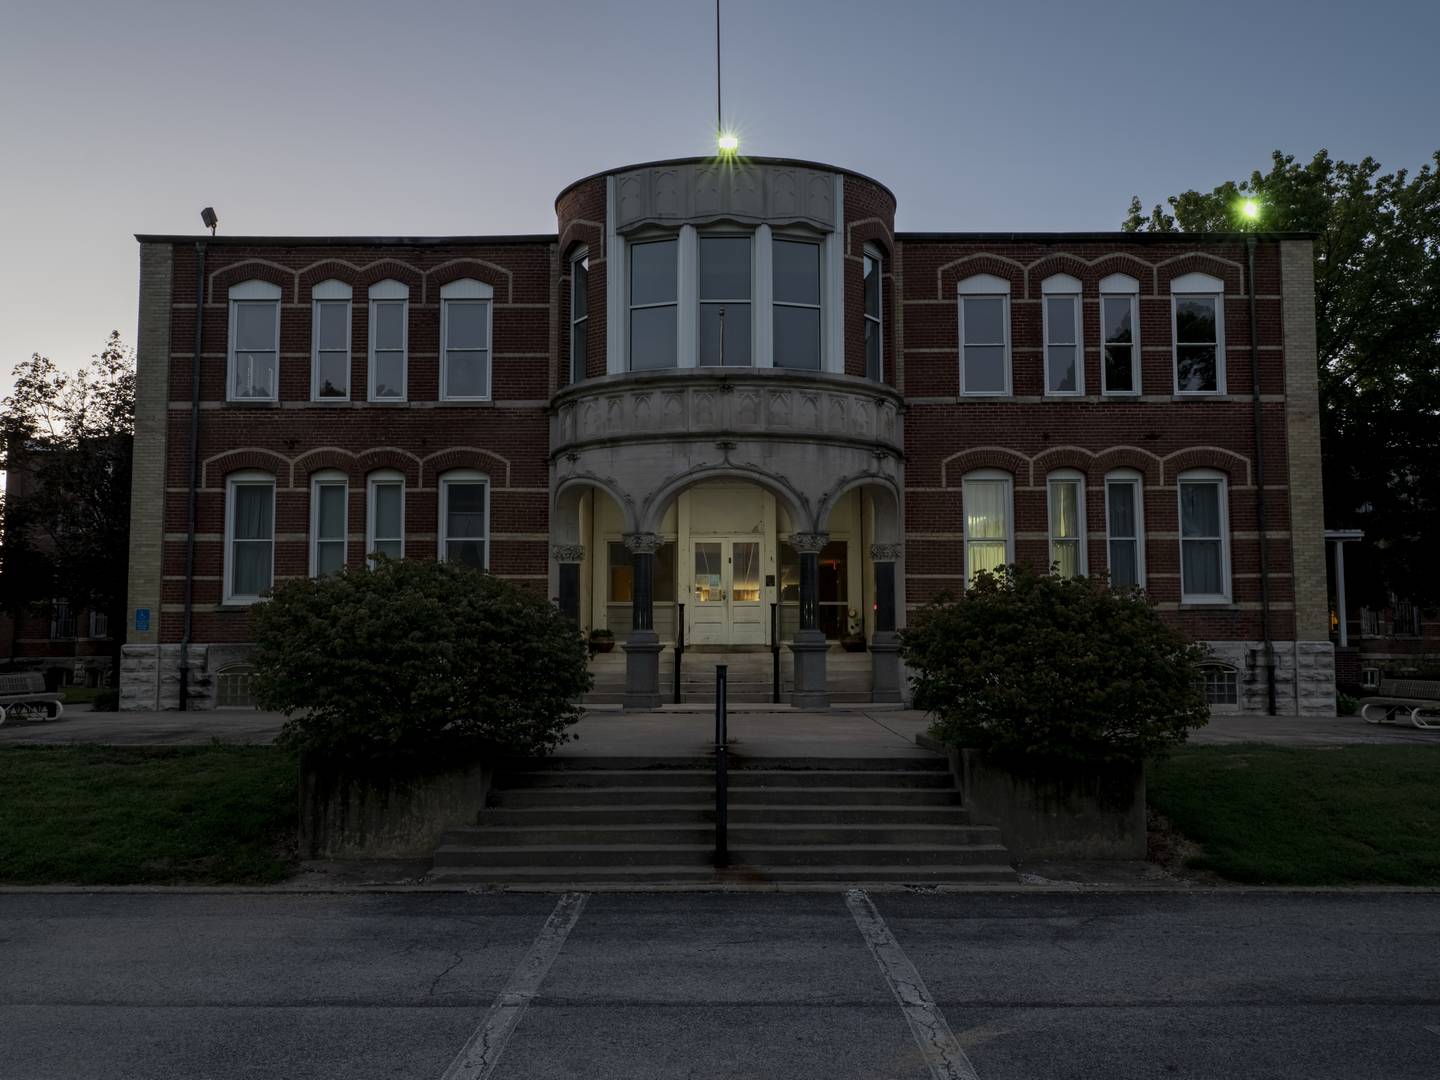 The state-run Choate Mental Health and Developmental Center is seen in Anna, Ill., Wednesday, July 13, 2022. The 150-year-old facility serves about 330 people annually. (Photo © Whitney Curtis for ProPublica)